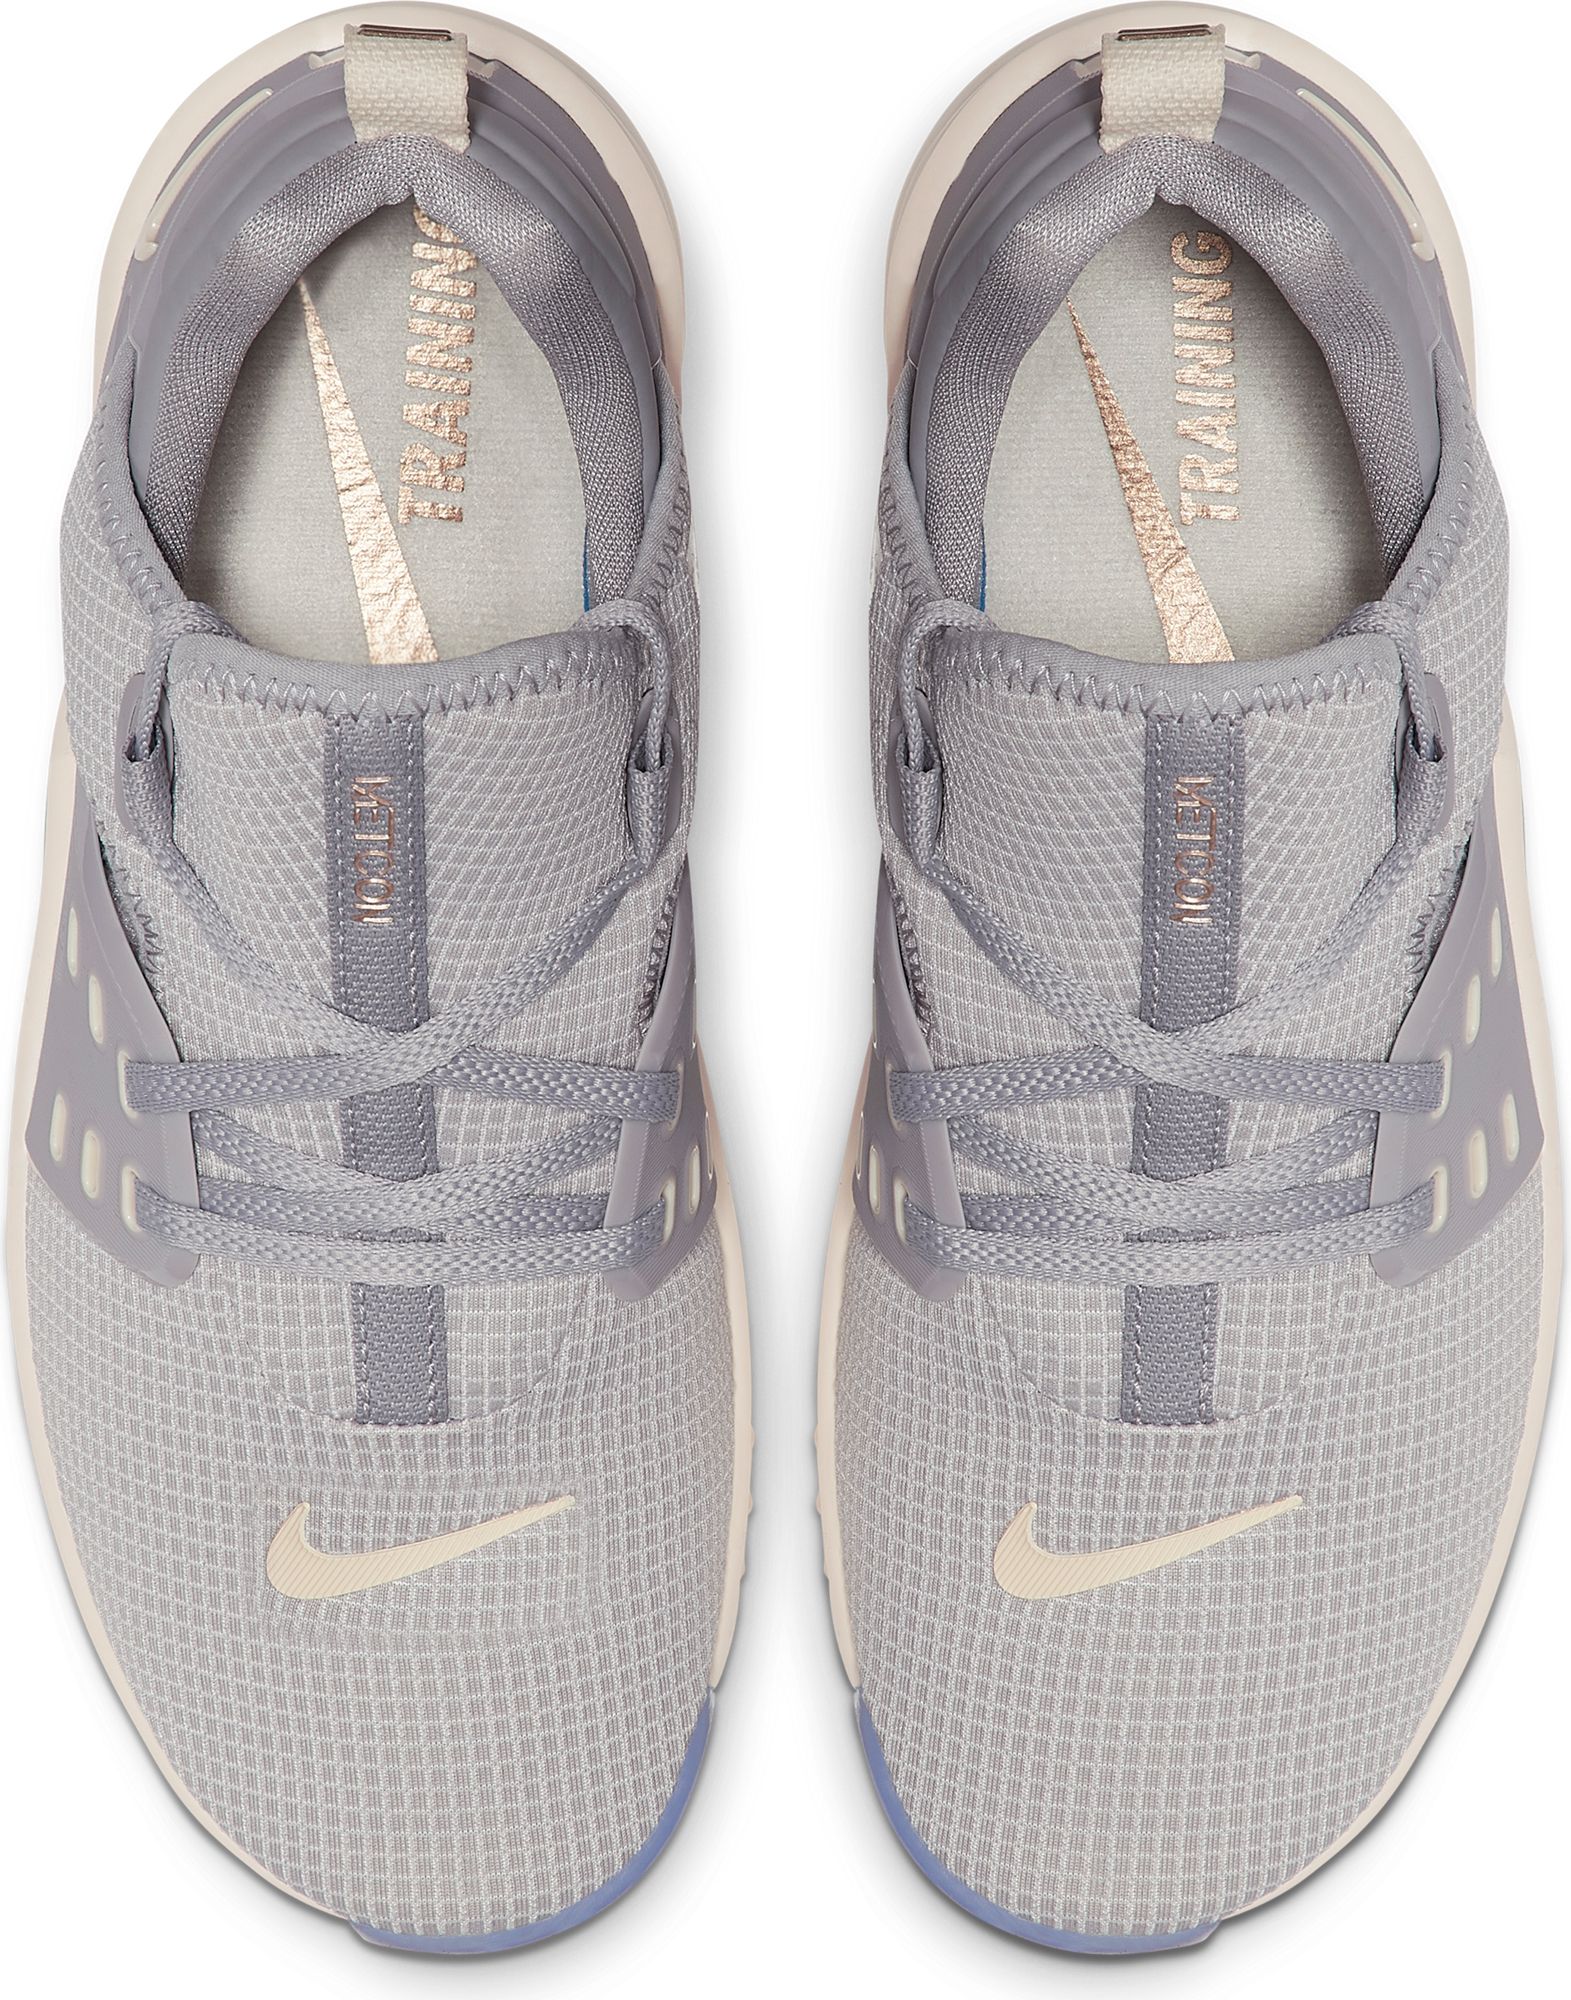 nike women's free metcon 2 amp fitness shoes